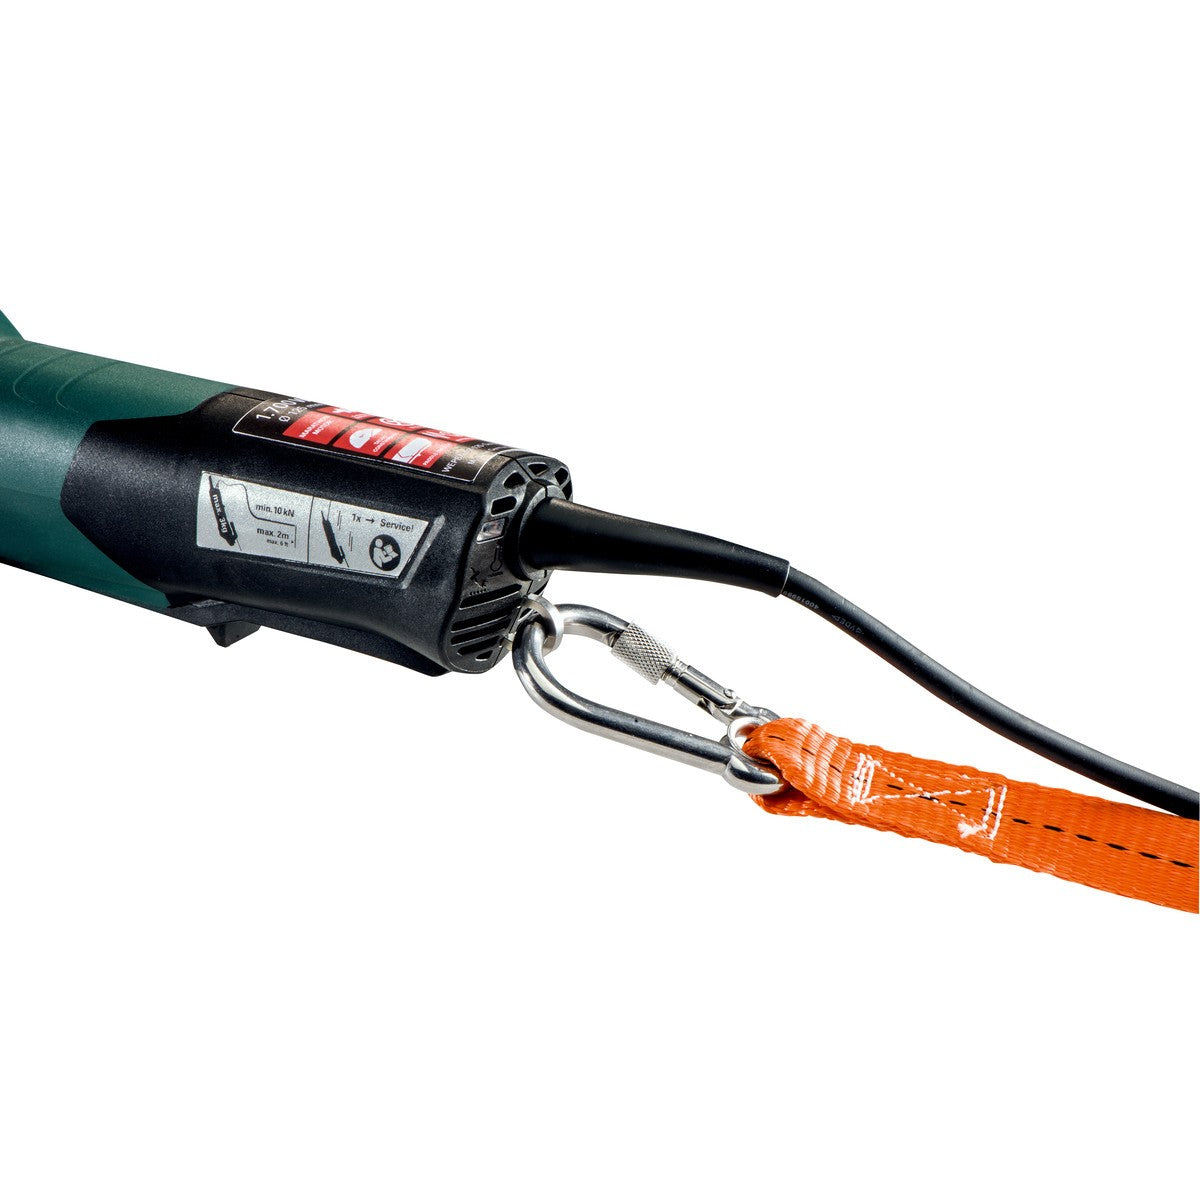 Metabo (600437420) 5 inch Angle Grinder w NonLock Paddle Switch Brake & Drop Secure image 5 of 6